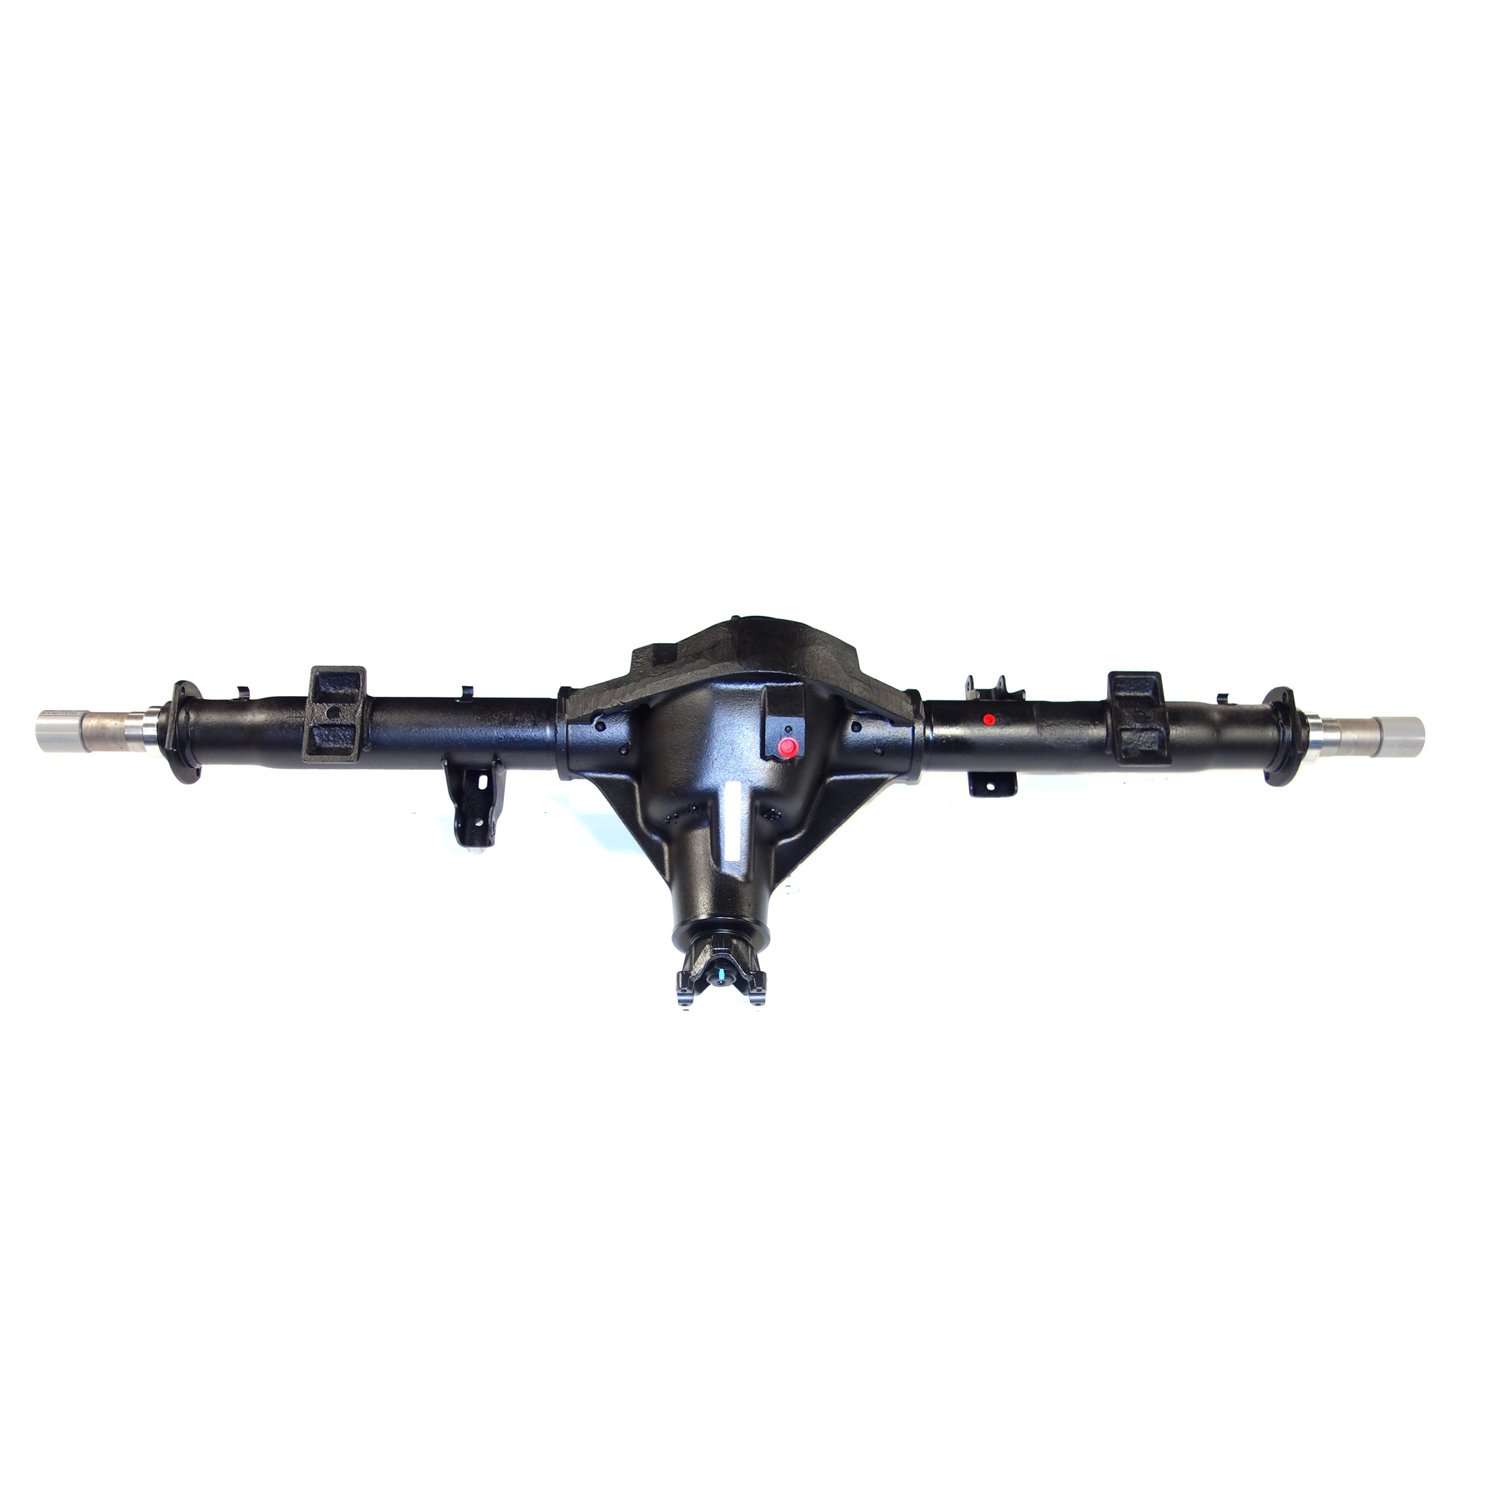 Remanufactured Complete Axle Assembly for Dana 80 00-01 Dodge Ram 3500 4.11 Ratio, 4x4